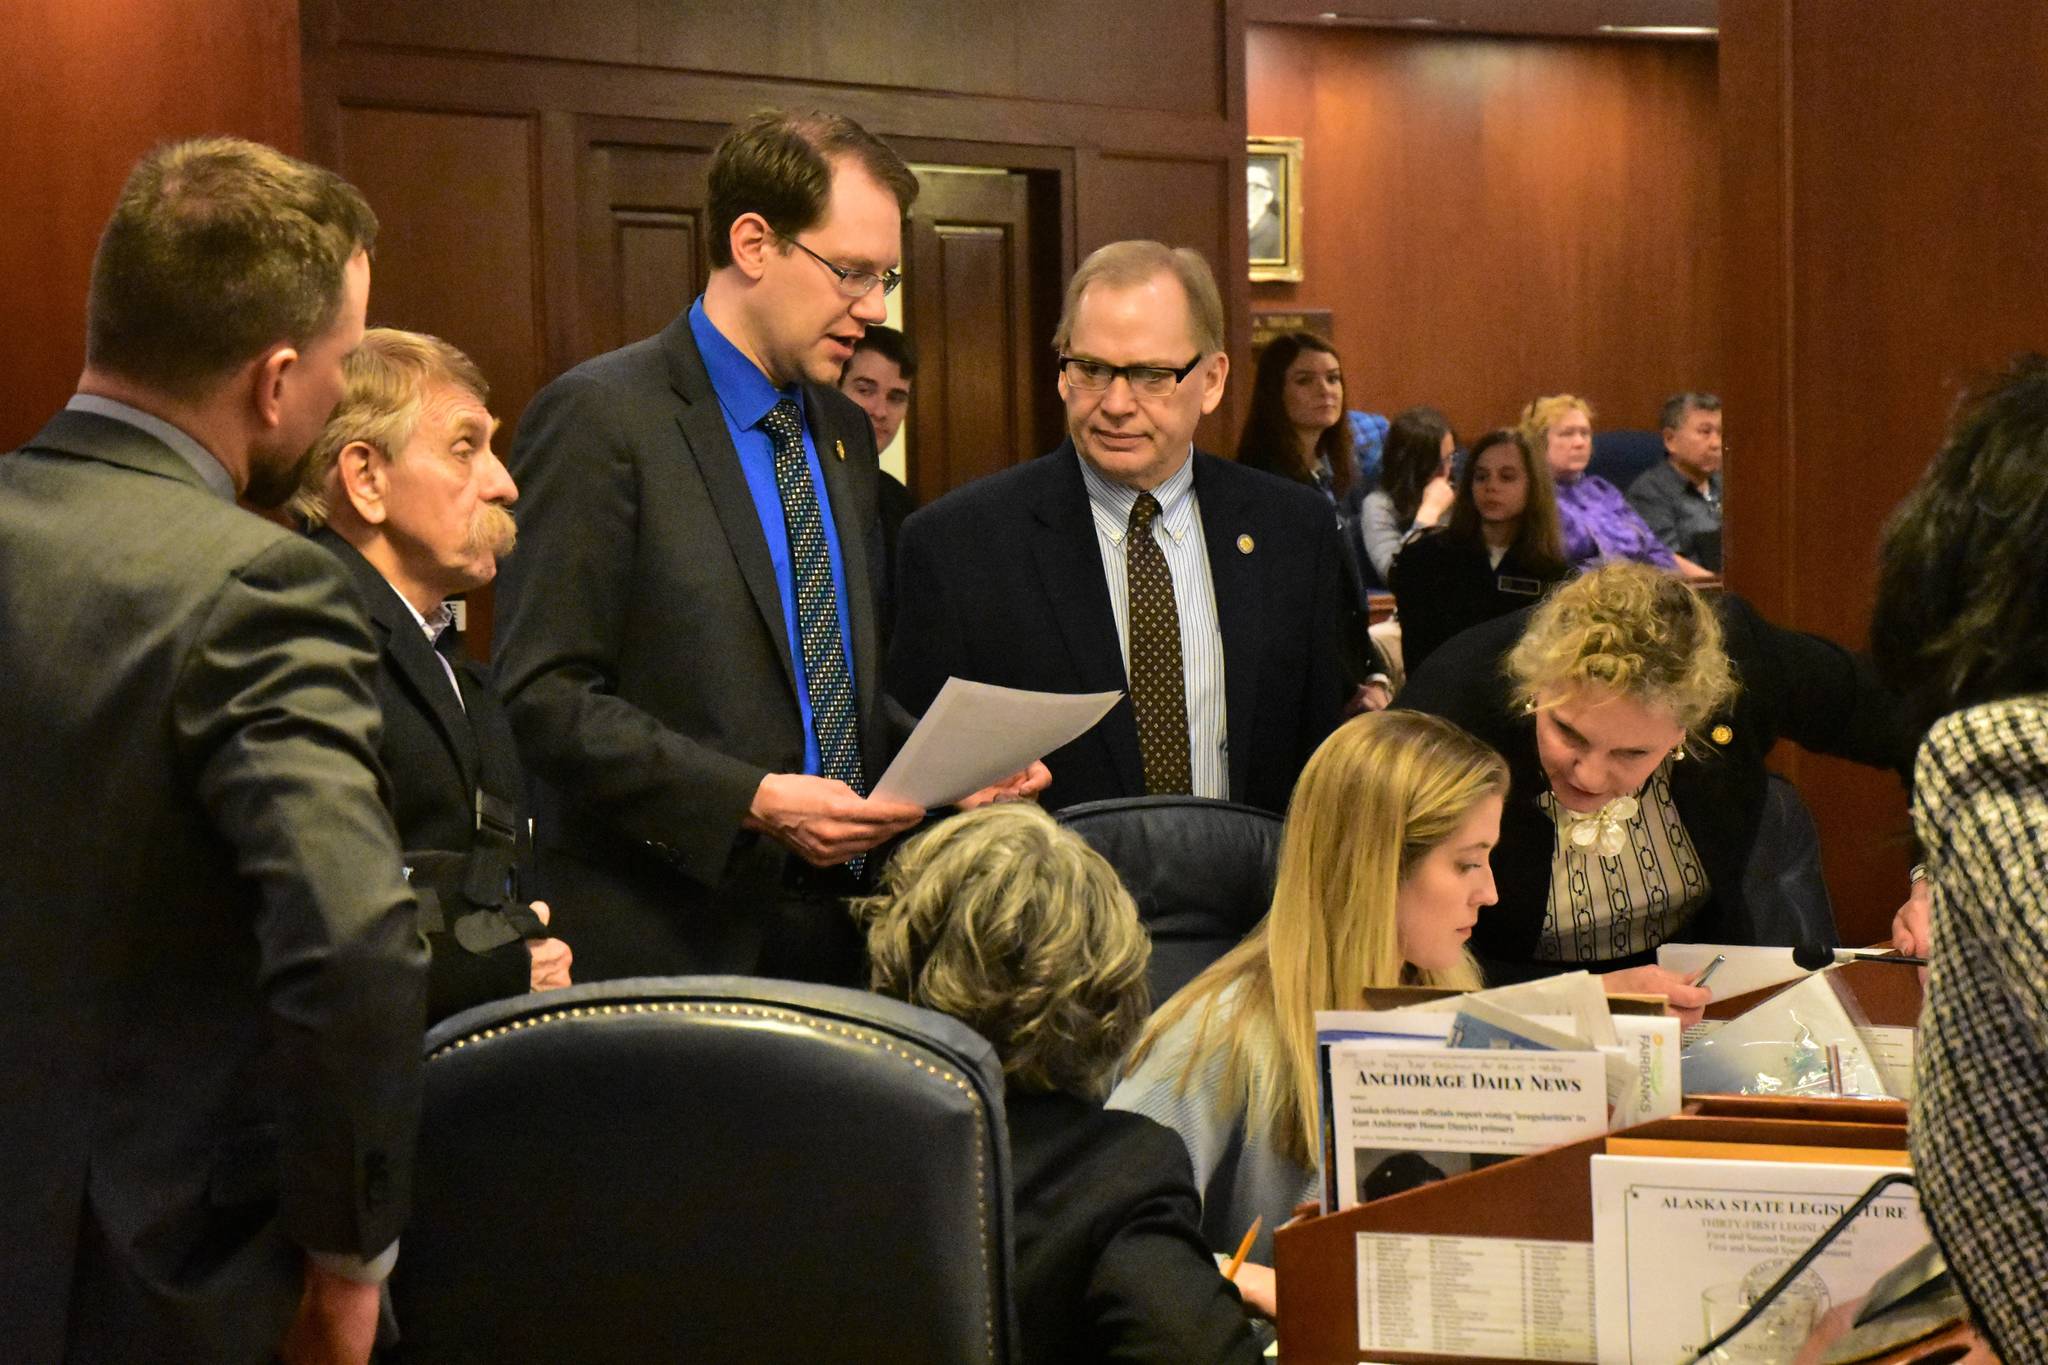 House representatives discuss an amendment on the floor of the House on Monday, Feb. 10, 2020. (Peter Segall | Juneau Empire)